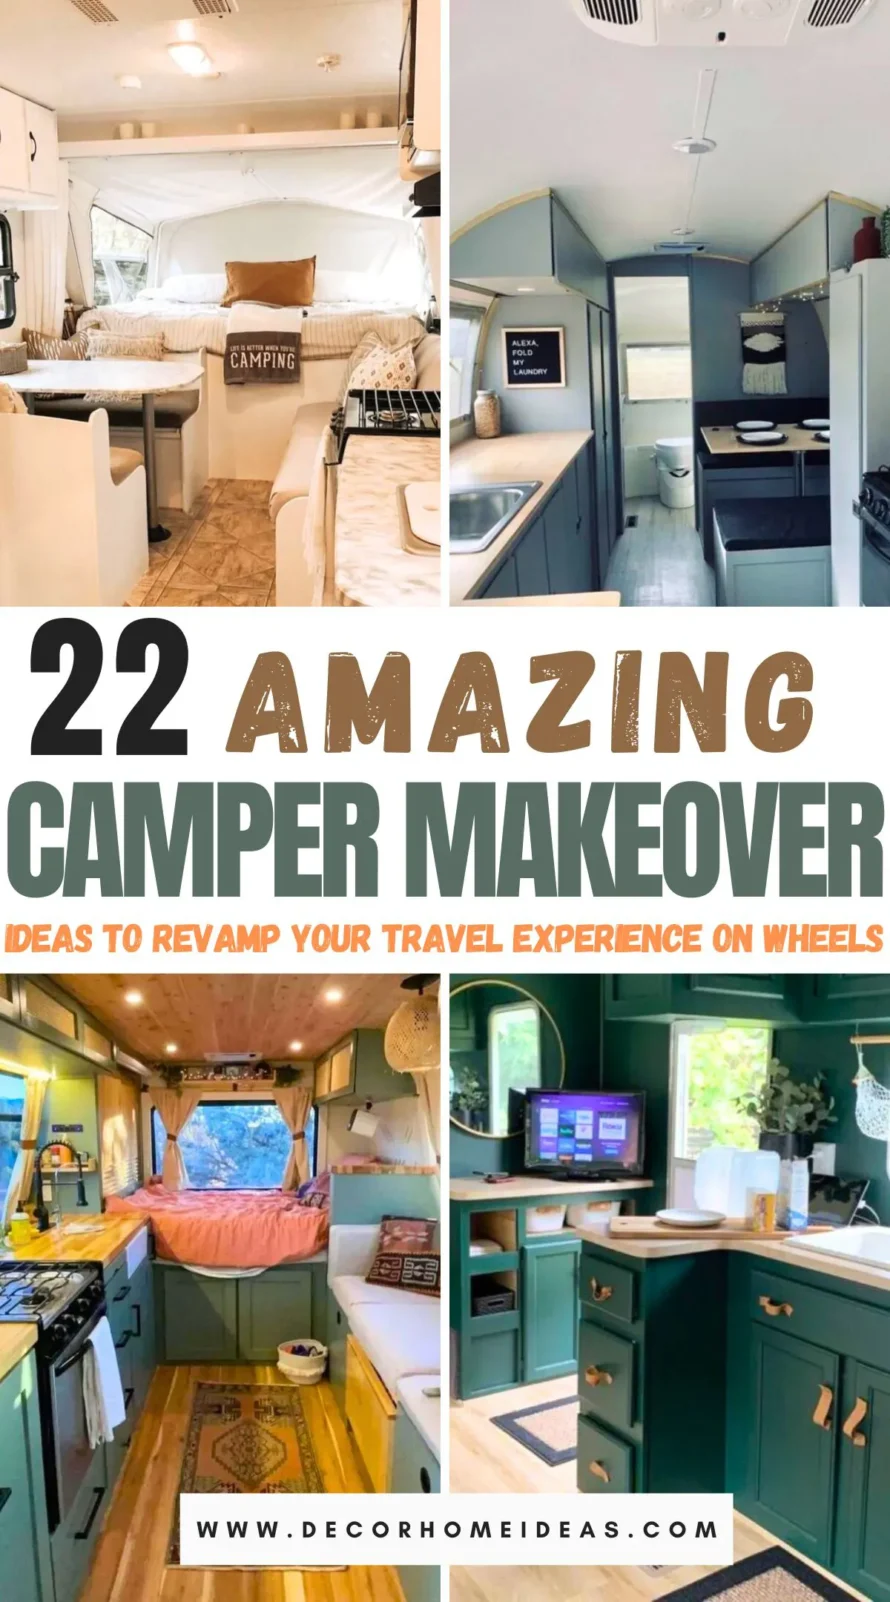 Transform your camper into a stylish and functional space with these 22 amazing makeover ideas. From cozy interiors to clever storage solutions, discover how to revamp your travel experience on wheels. Get inspired by creative decor tips and innovative upgrades that will make your camper the envy of the campground. Ready to hit the road in style? Find out more in our comprehensive guide!